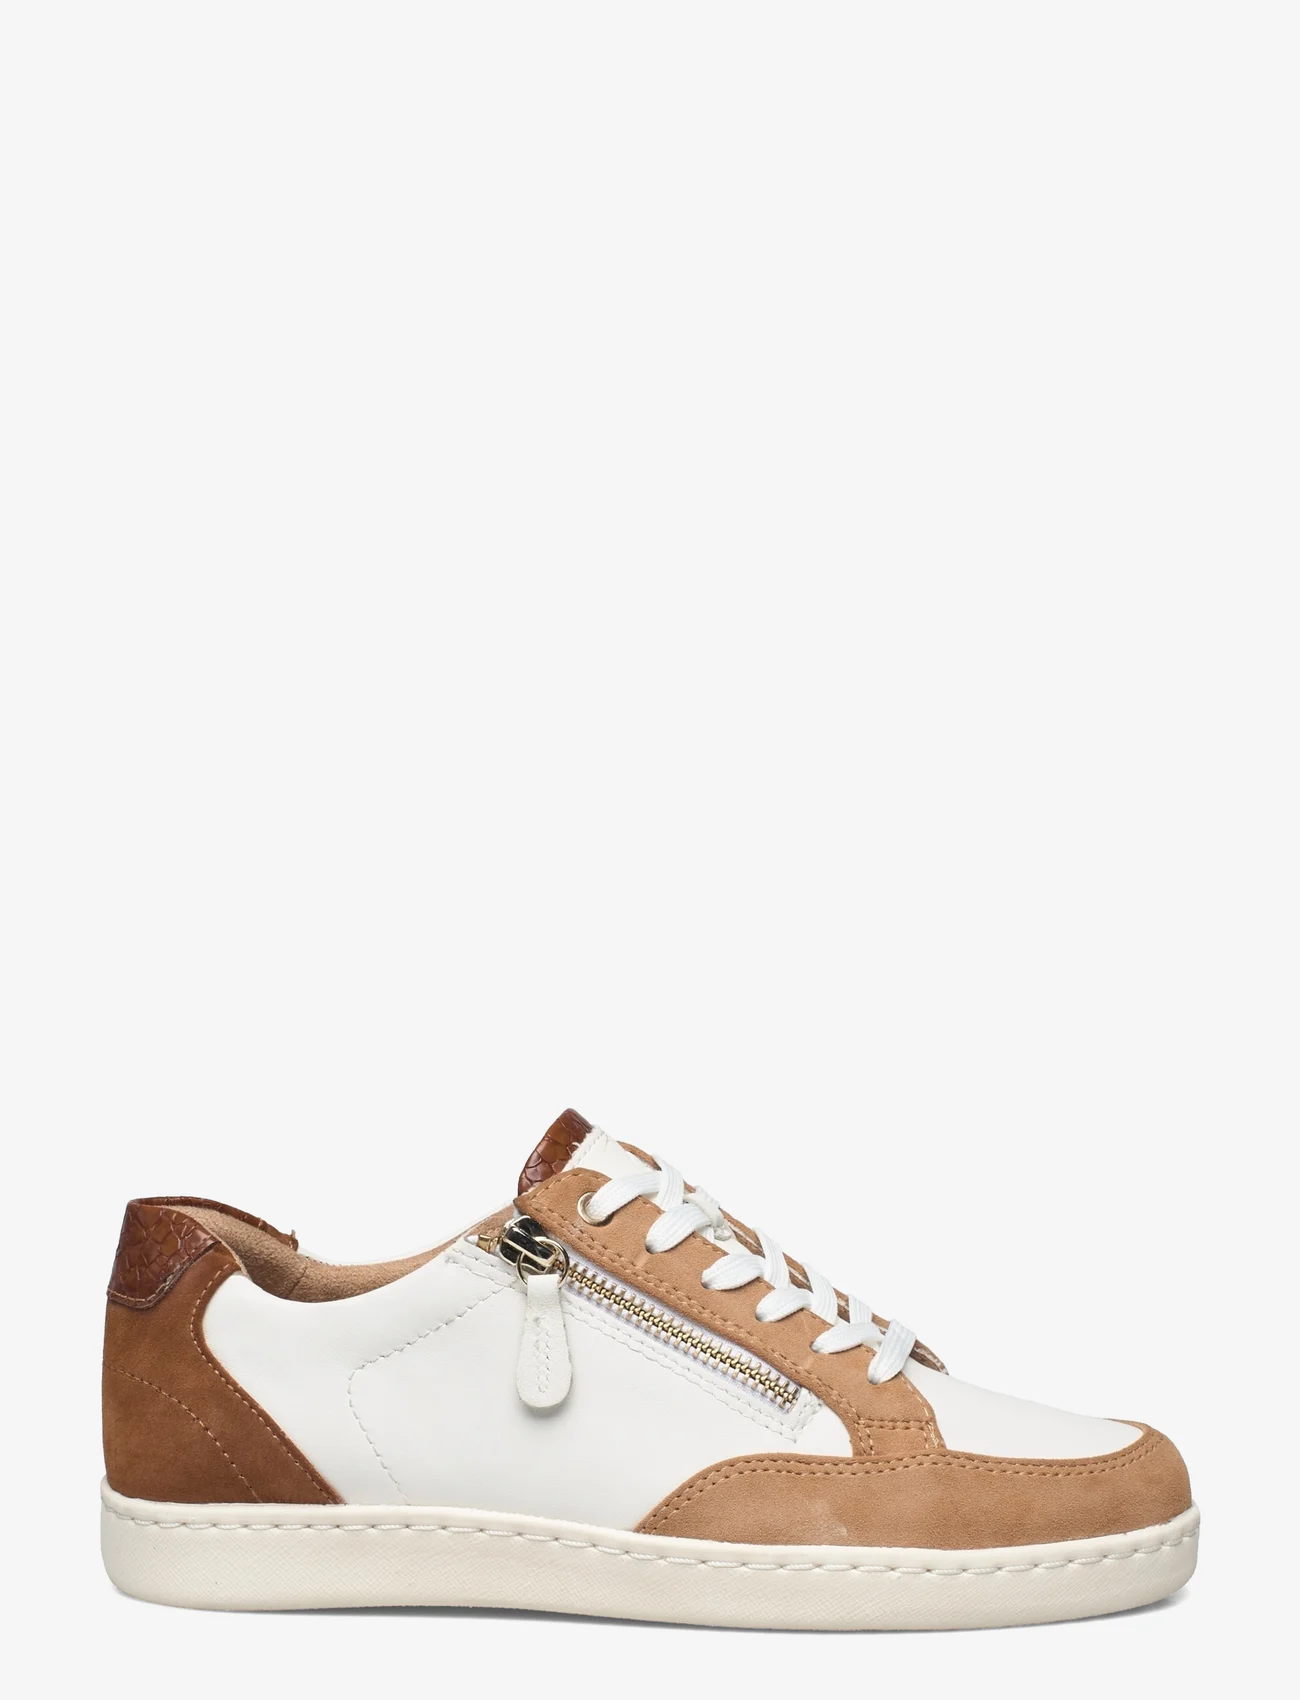 Tamaris - Woms Lace-up - sneakers med lavt skaft - wht/almond com - 1